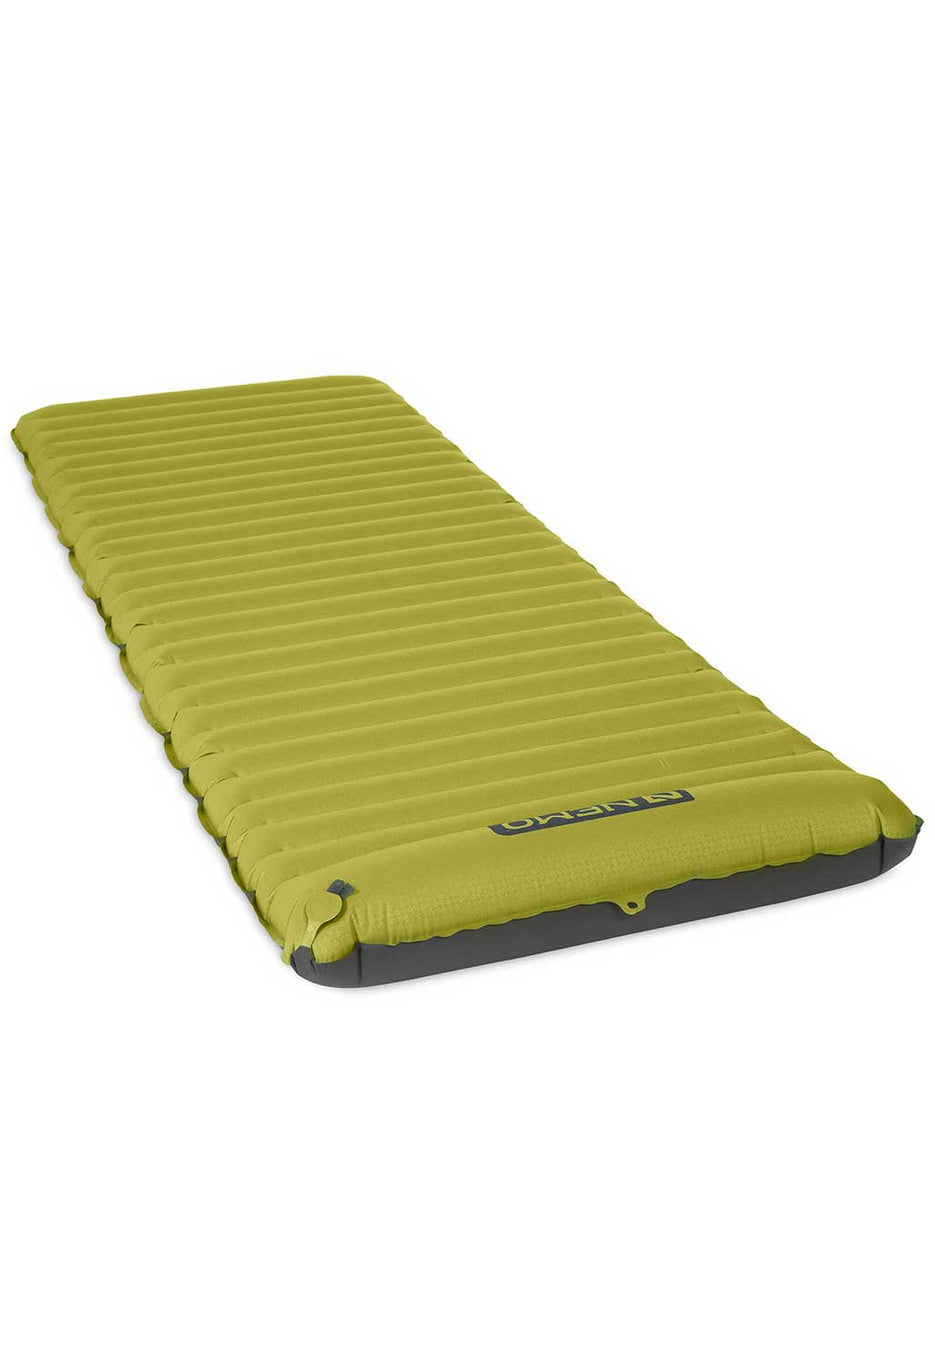 Nemo Astro Insulated Long Wide Camping Mat 0